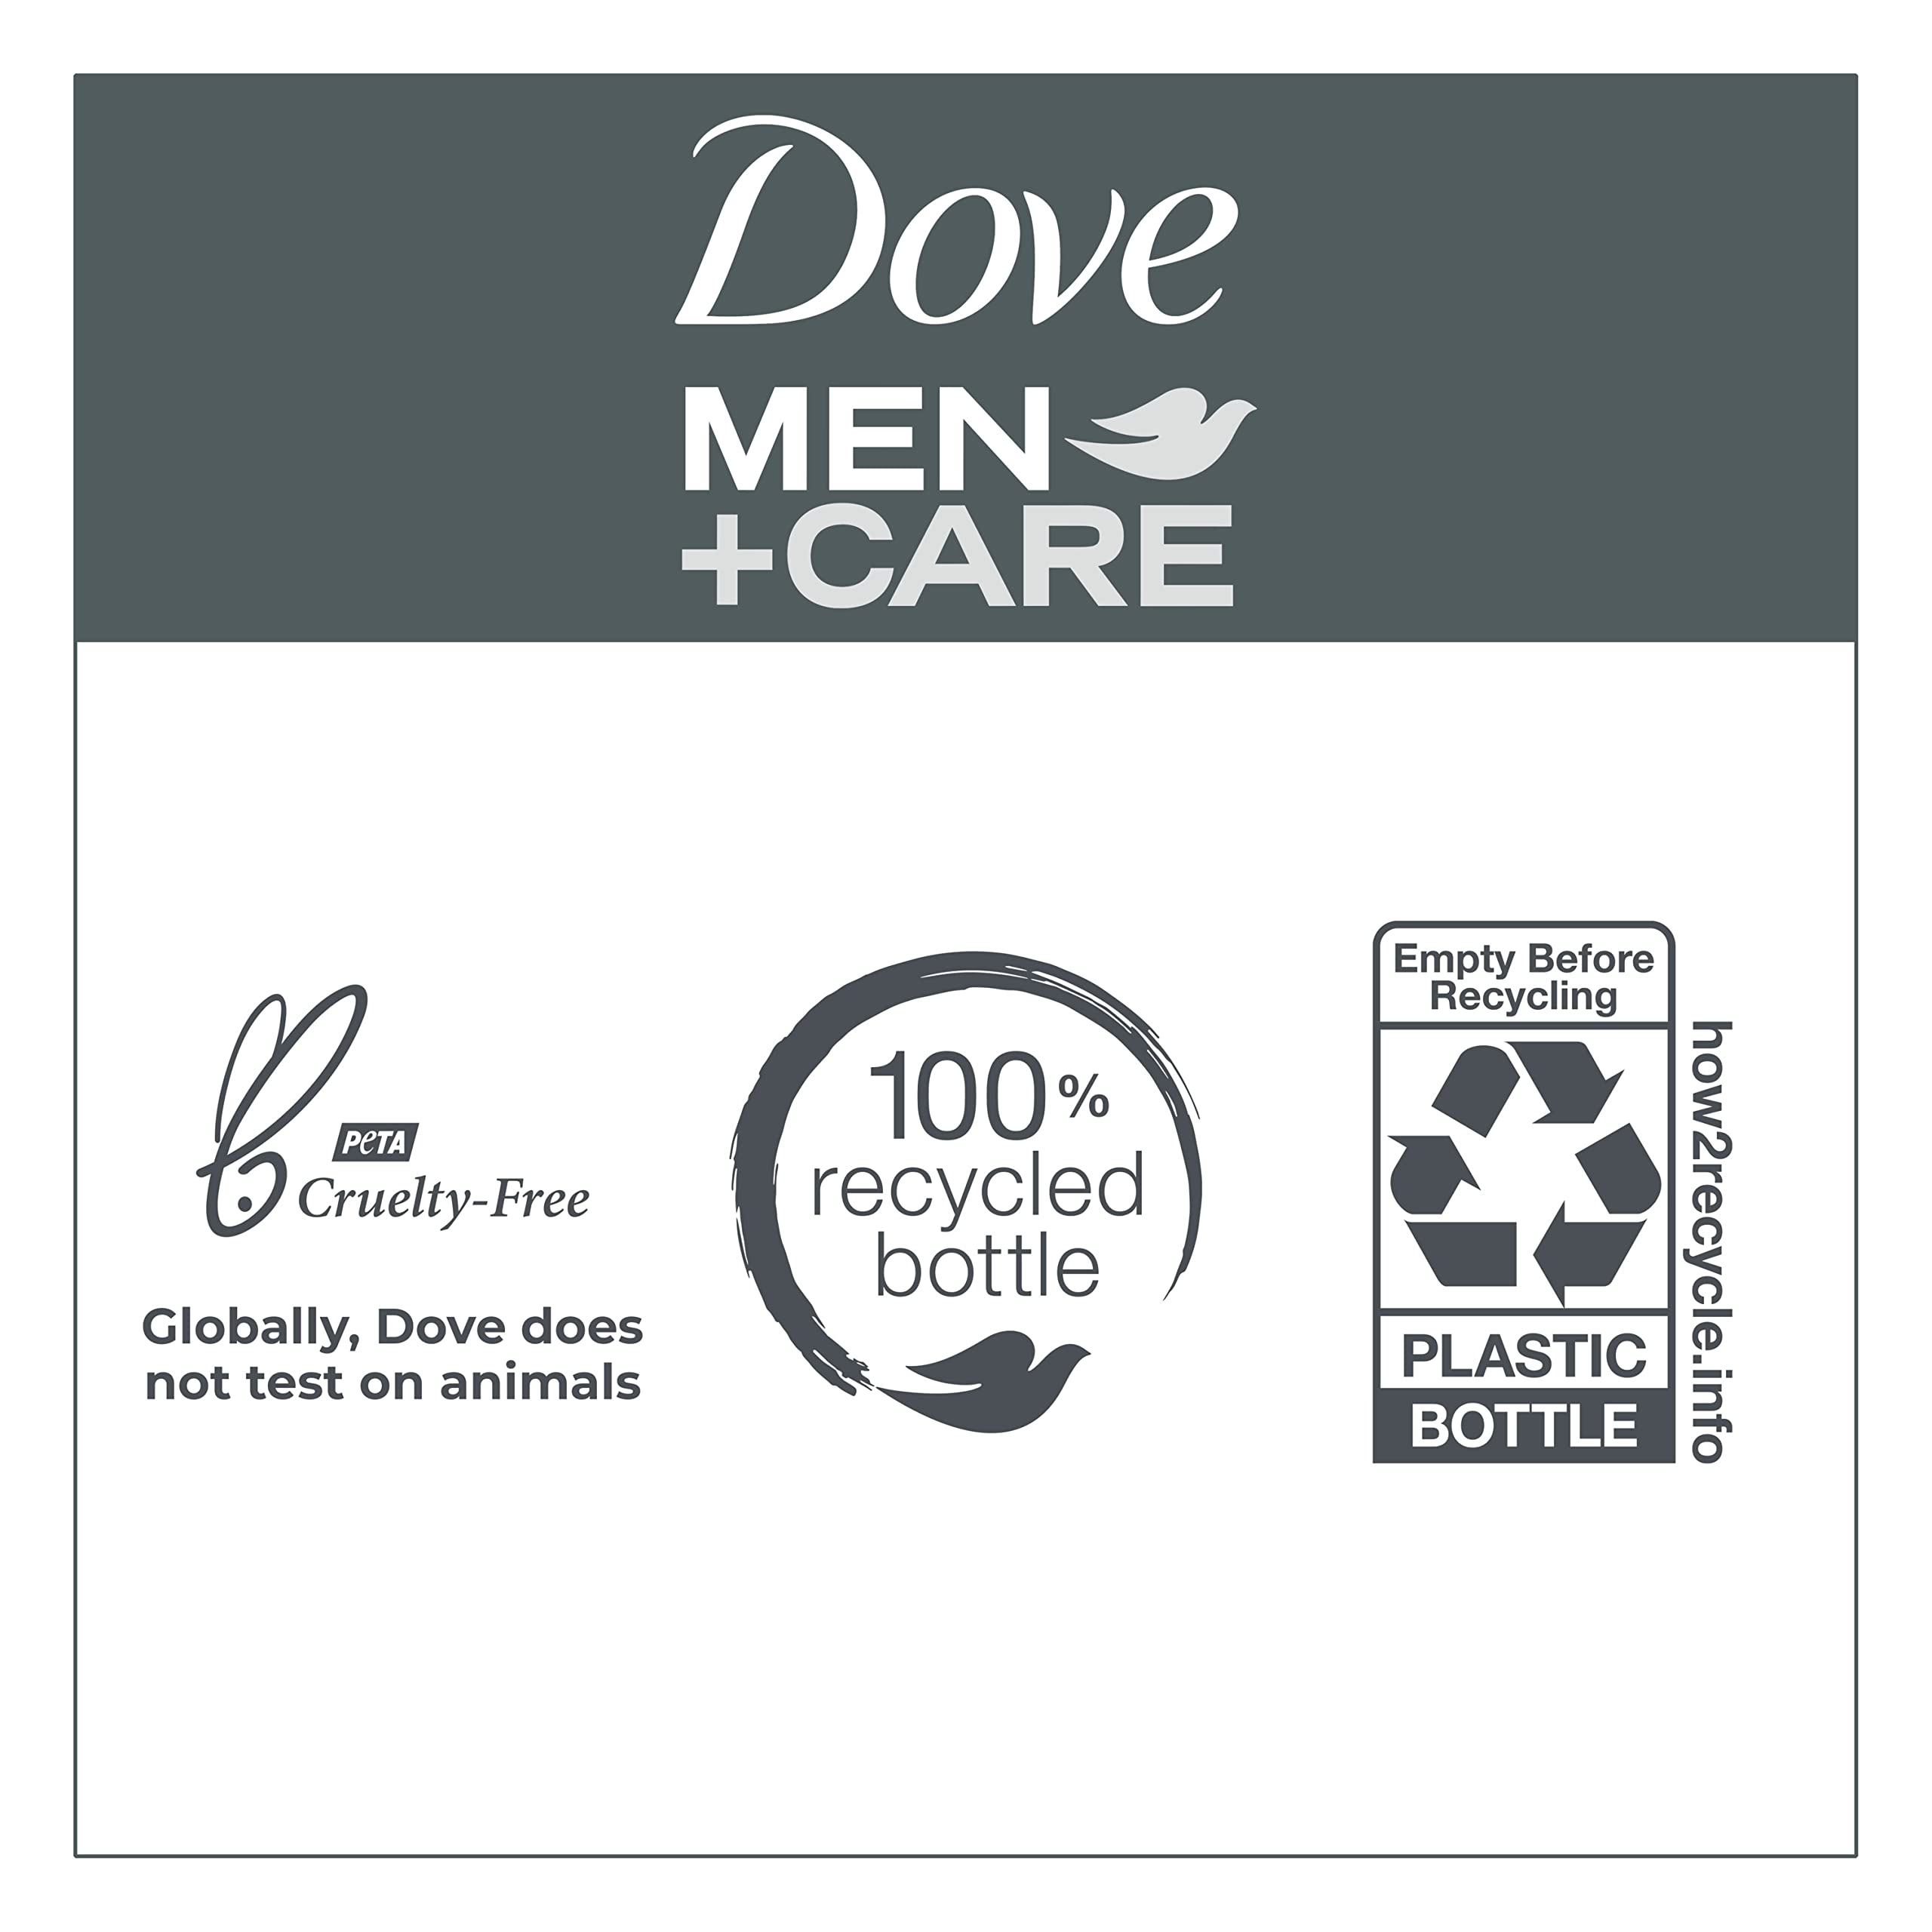 Dove Men+Care 2 in 1 Shampoo and Conditioner Youthfull Revitalize 3 Count For Fine, Thin Hair Men's Shampoo and Conditioner with Bamboo Extract + Biotin 20.4 oz